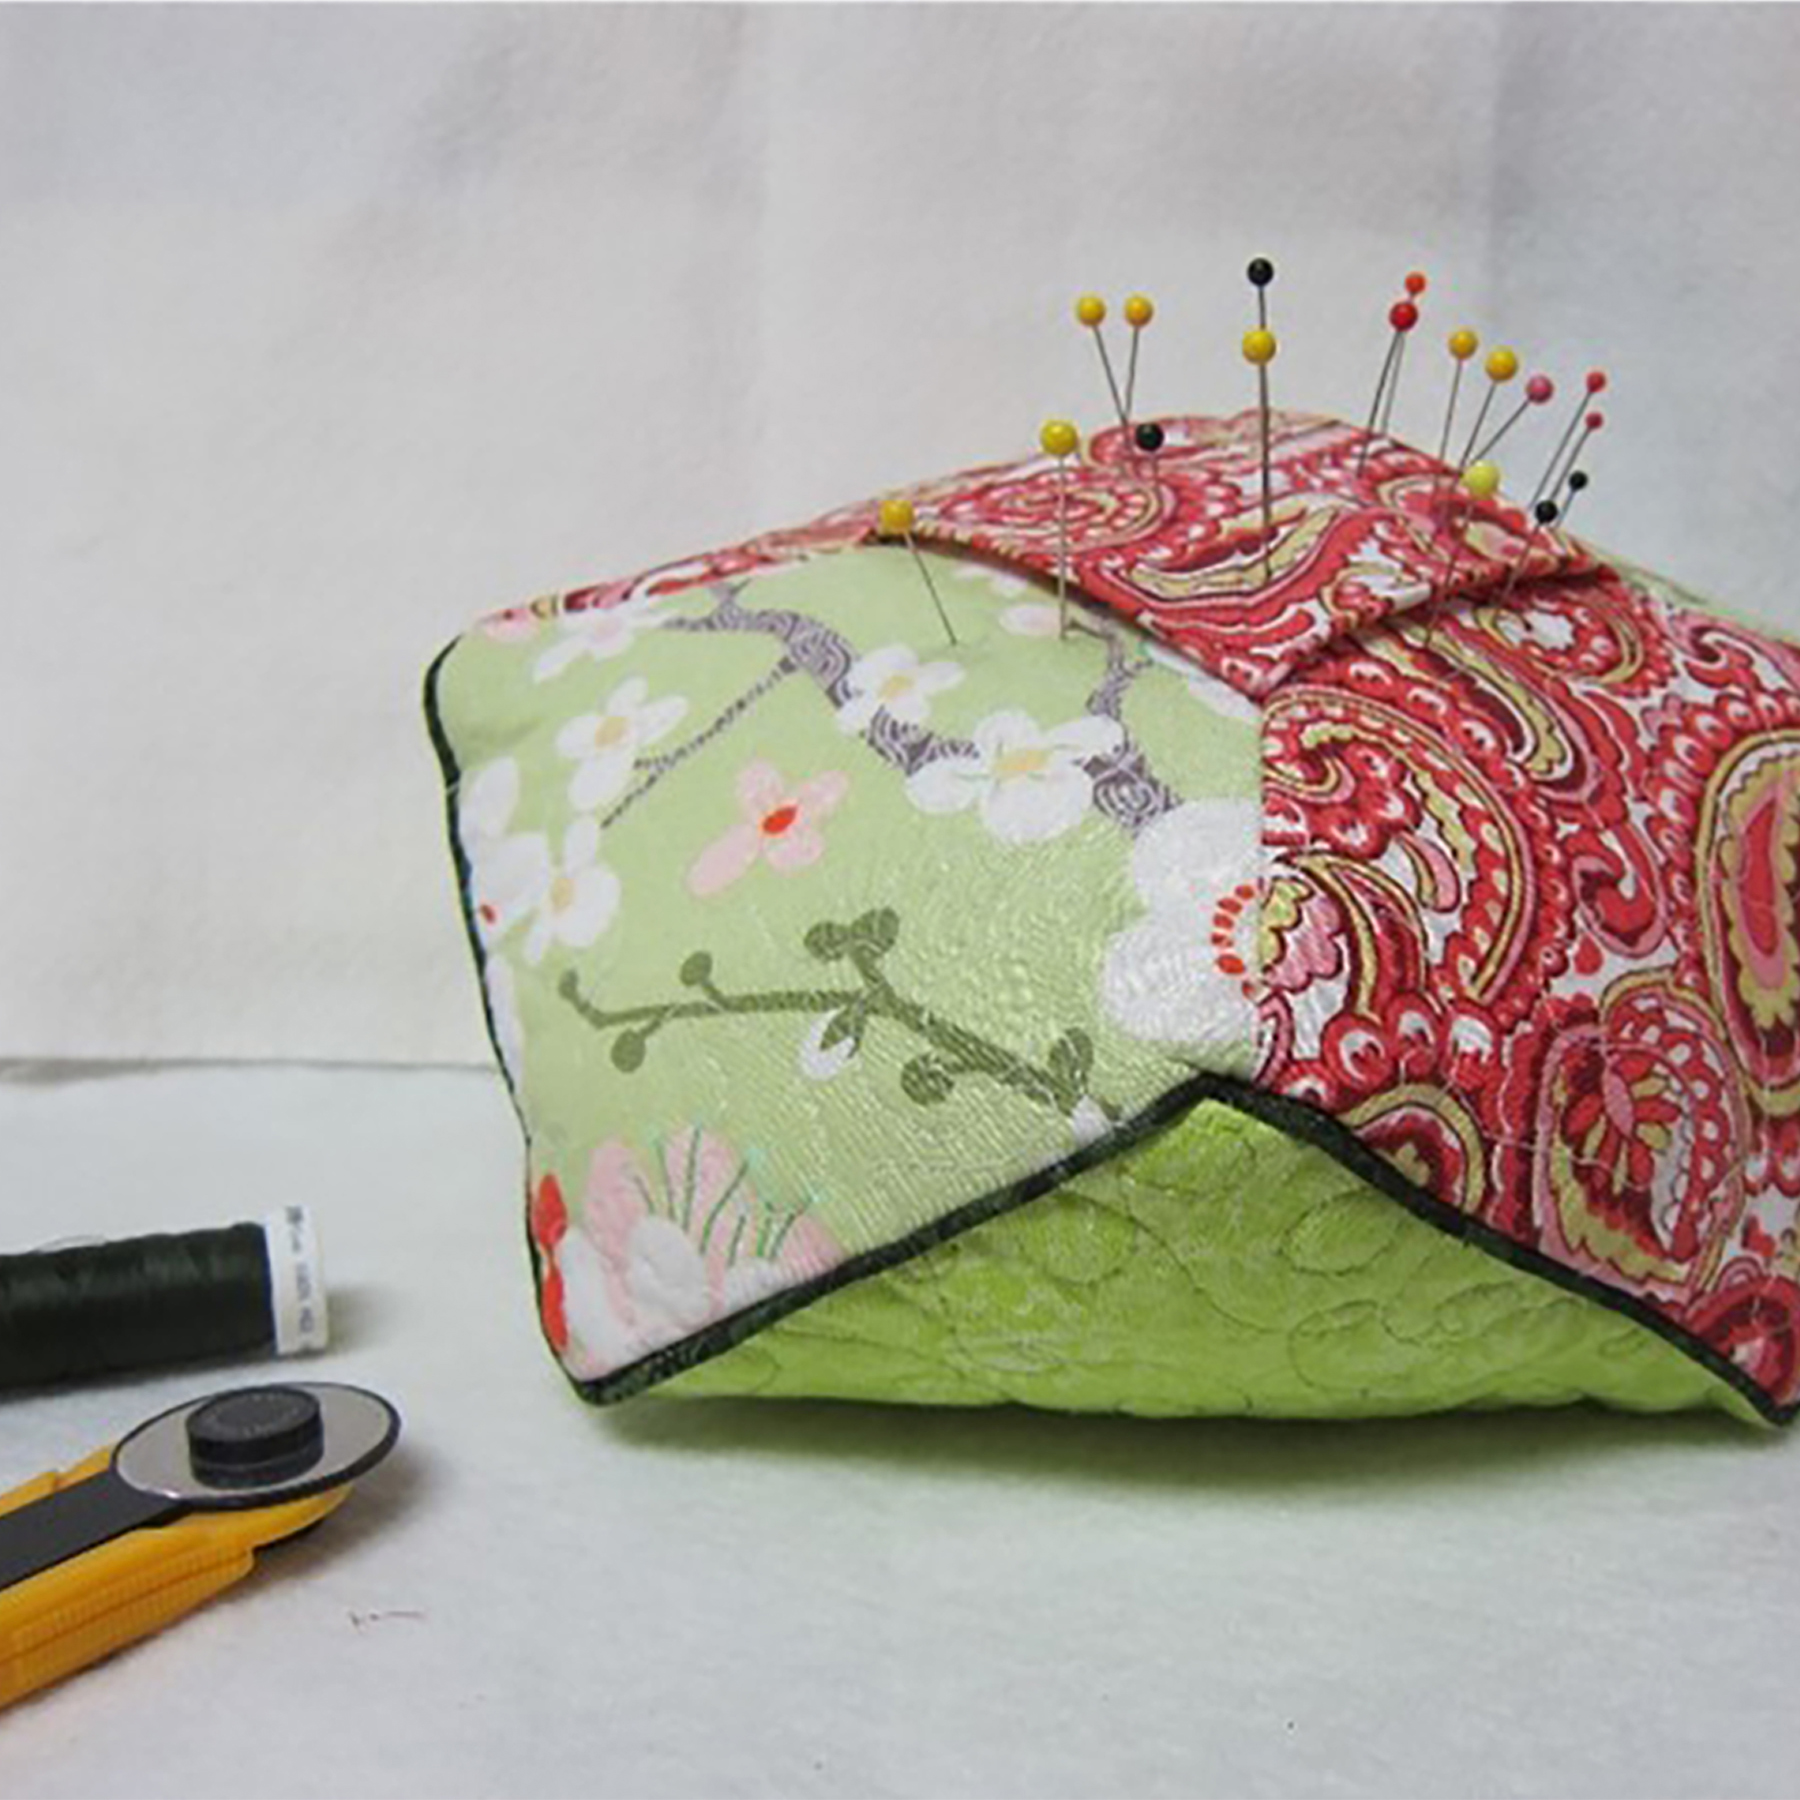 Featured image for “Triple 3D Pin Cushion”